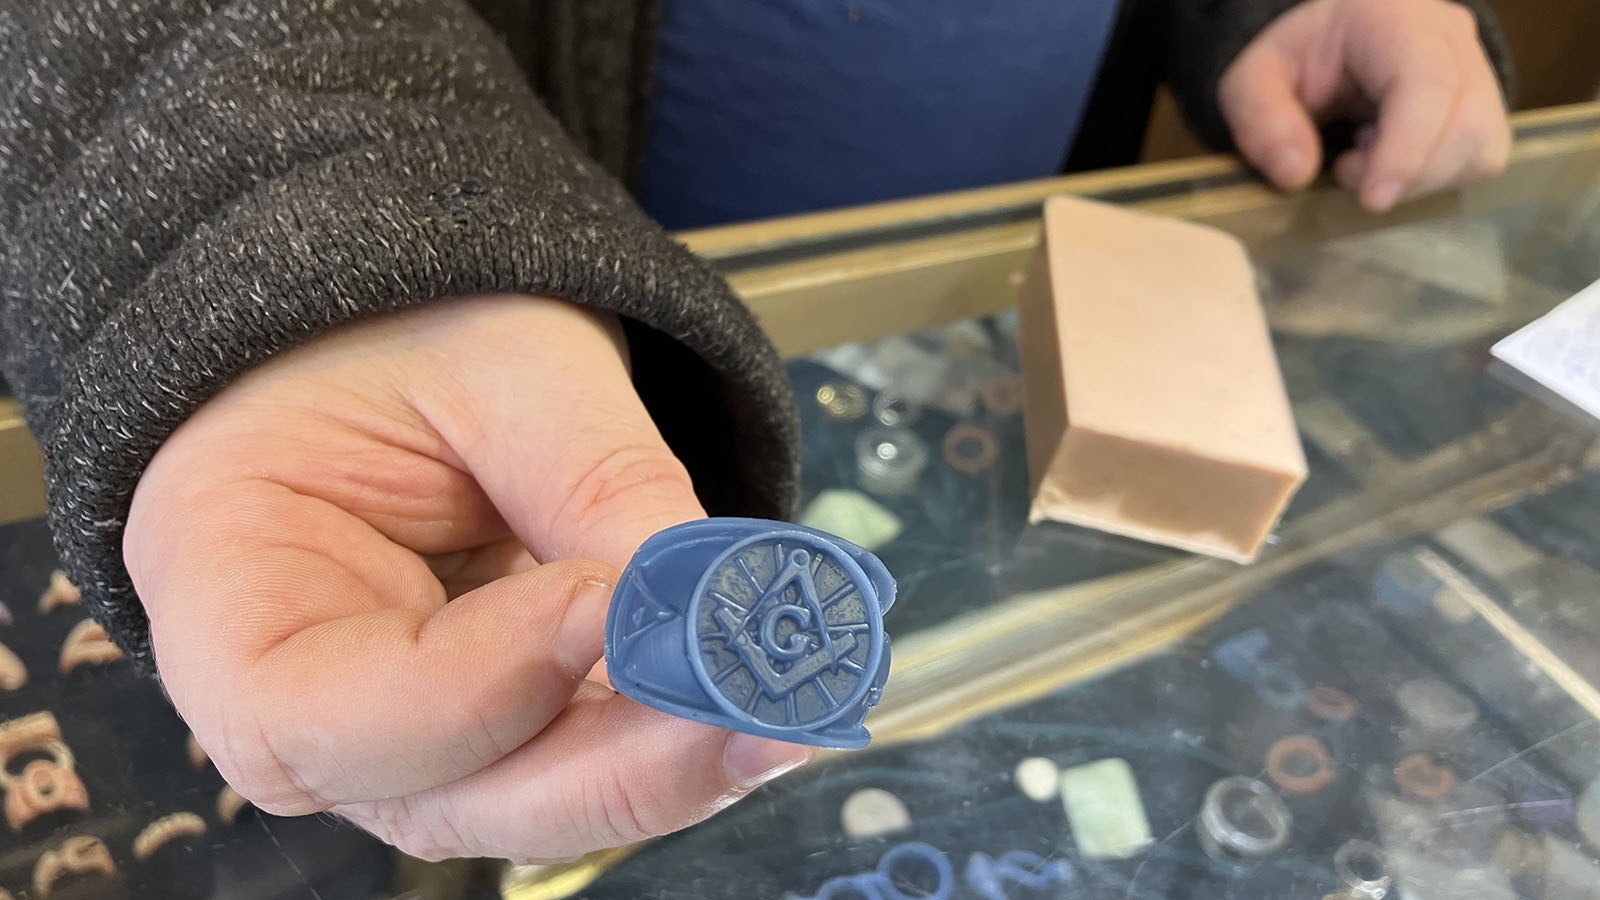 An original Masonic ring that a customer designed and Sid Anderson was able to create. This was form of the ring will be covered in ceramic and then gold put into the ceramic to create the ring.